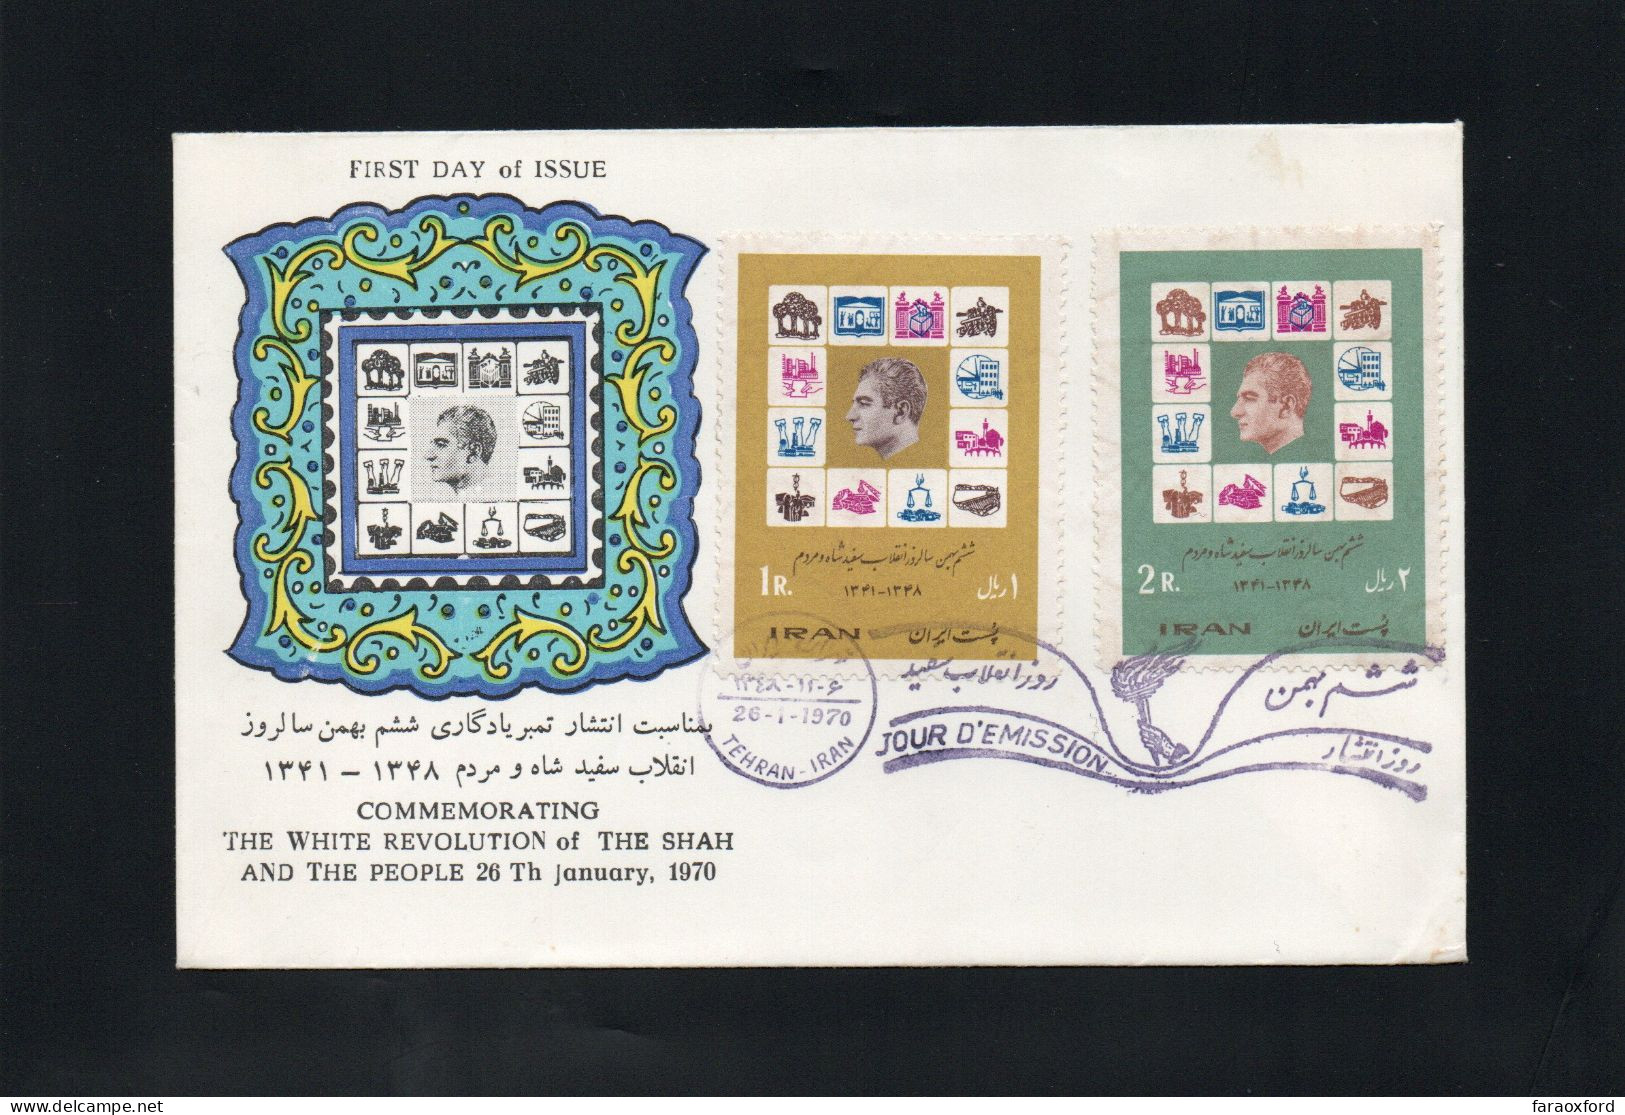 IRAN - ايران - PERSIA - 1970 - SHAH'S WHITE REVOLUTION - FIRST DAY COVER - TEHRAN SPECIAL POSTMARK - Iran